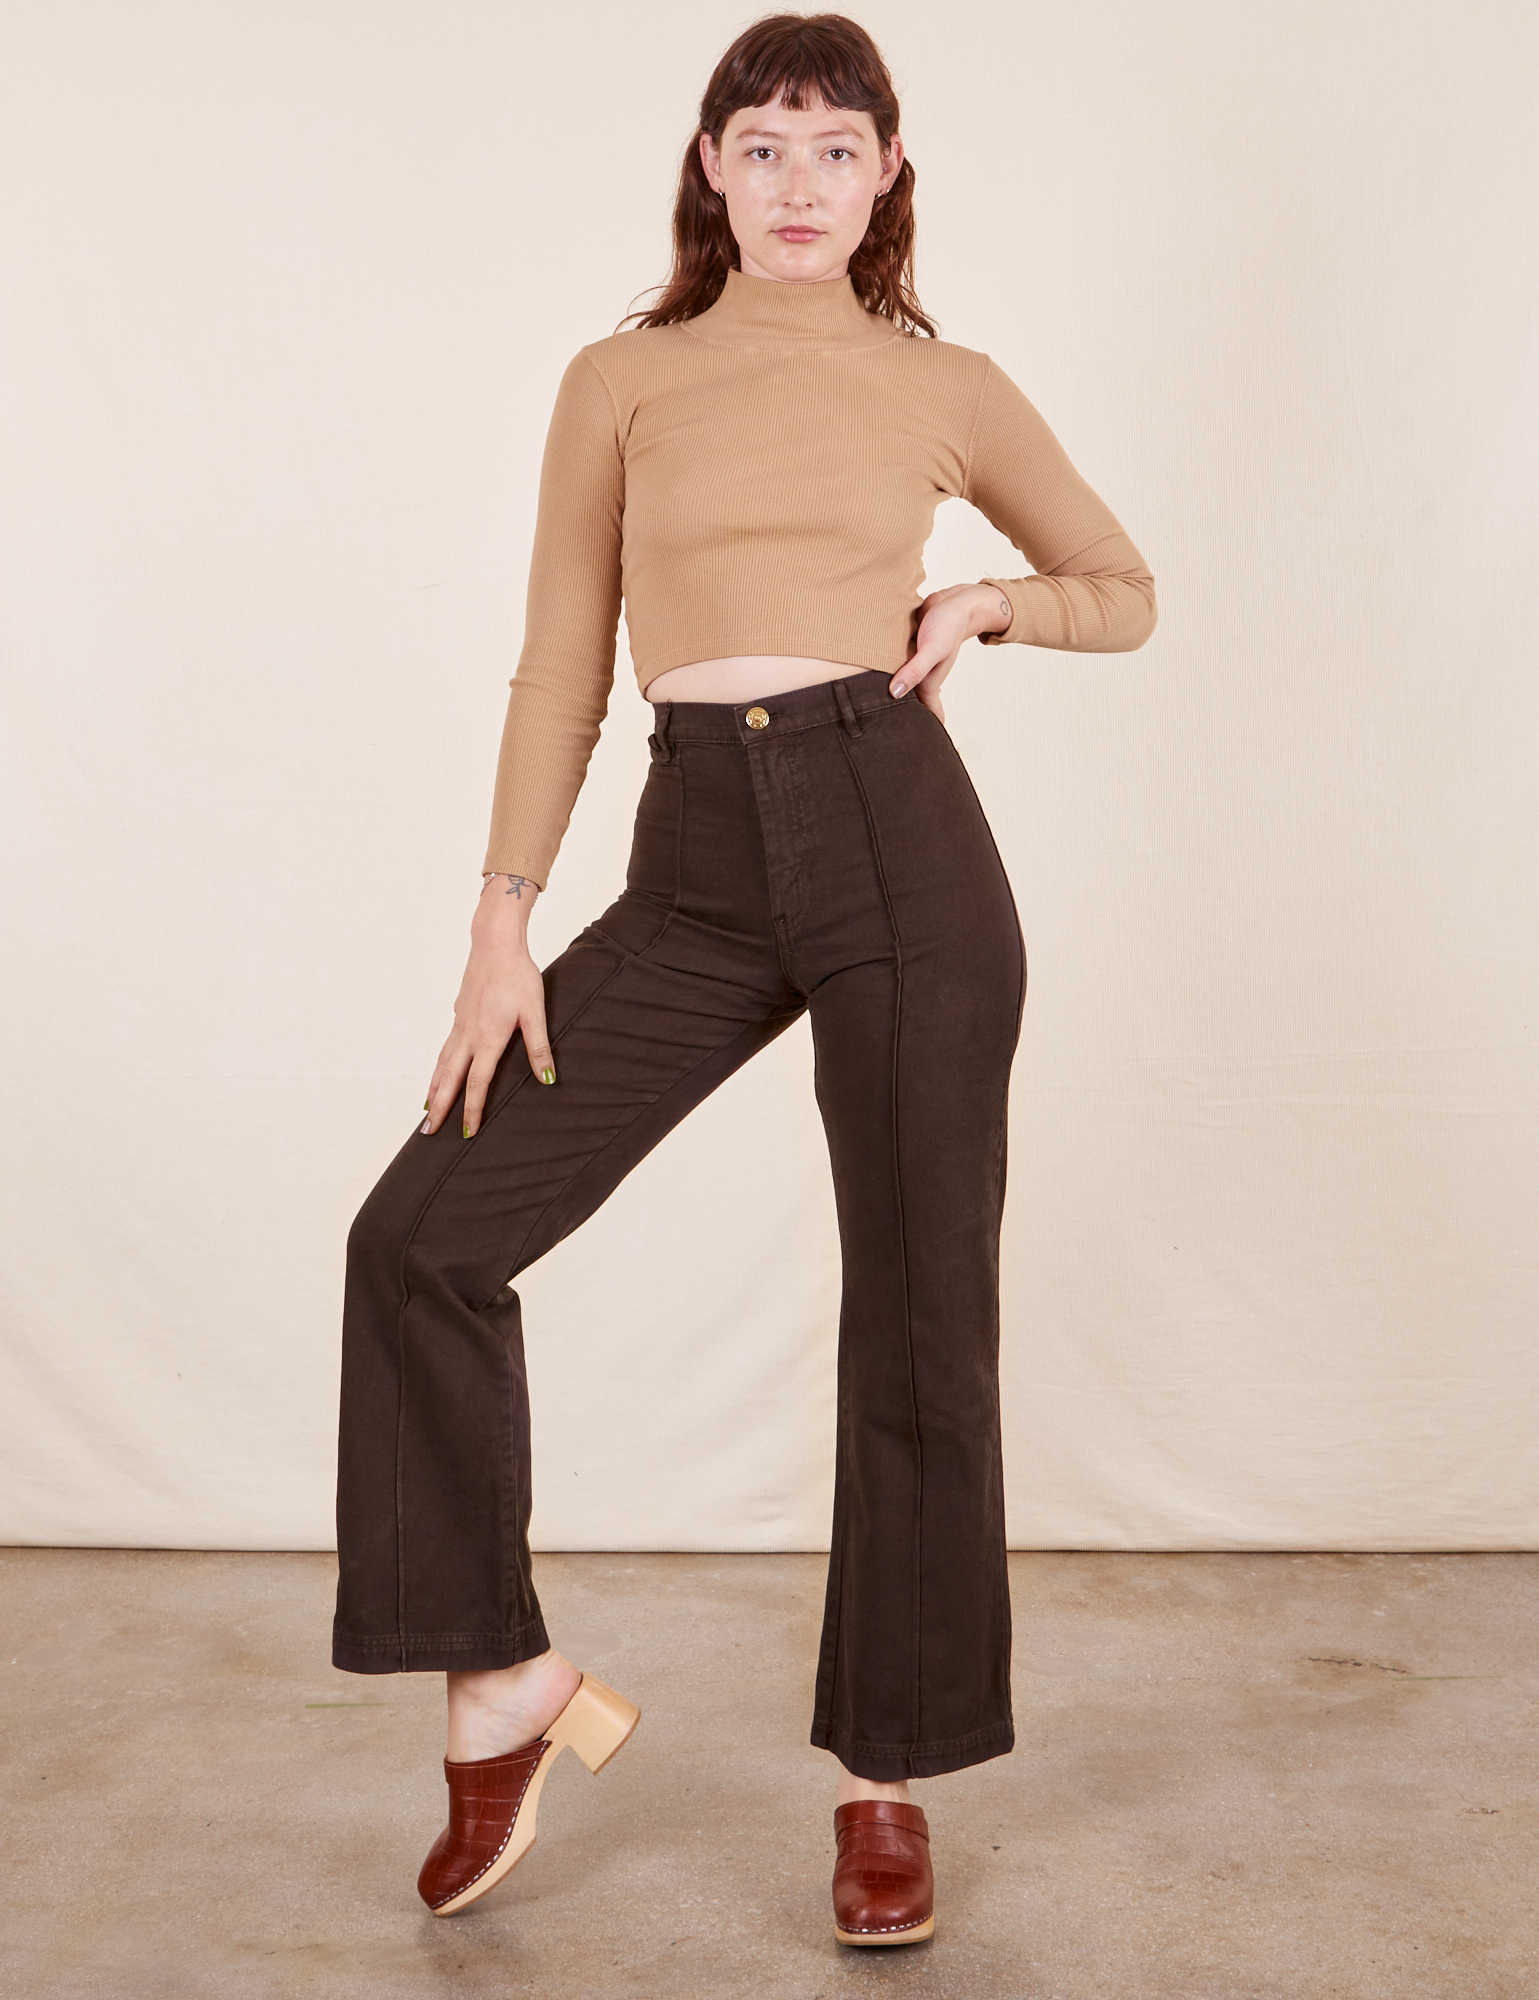 Alex is 5&#39;8&quot; and wearing XS Western Pants in Espresso Brown paired with tan Essential Turtleneck